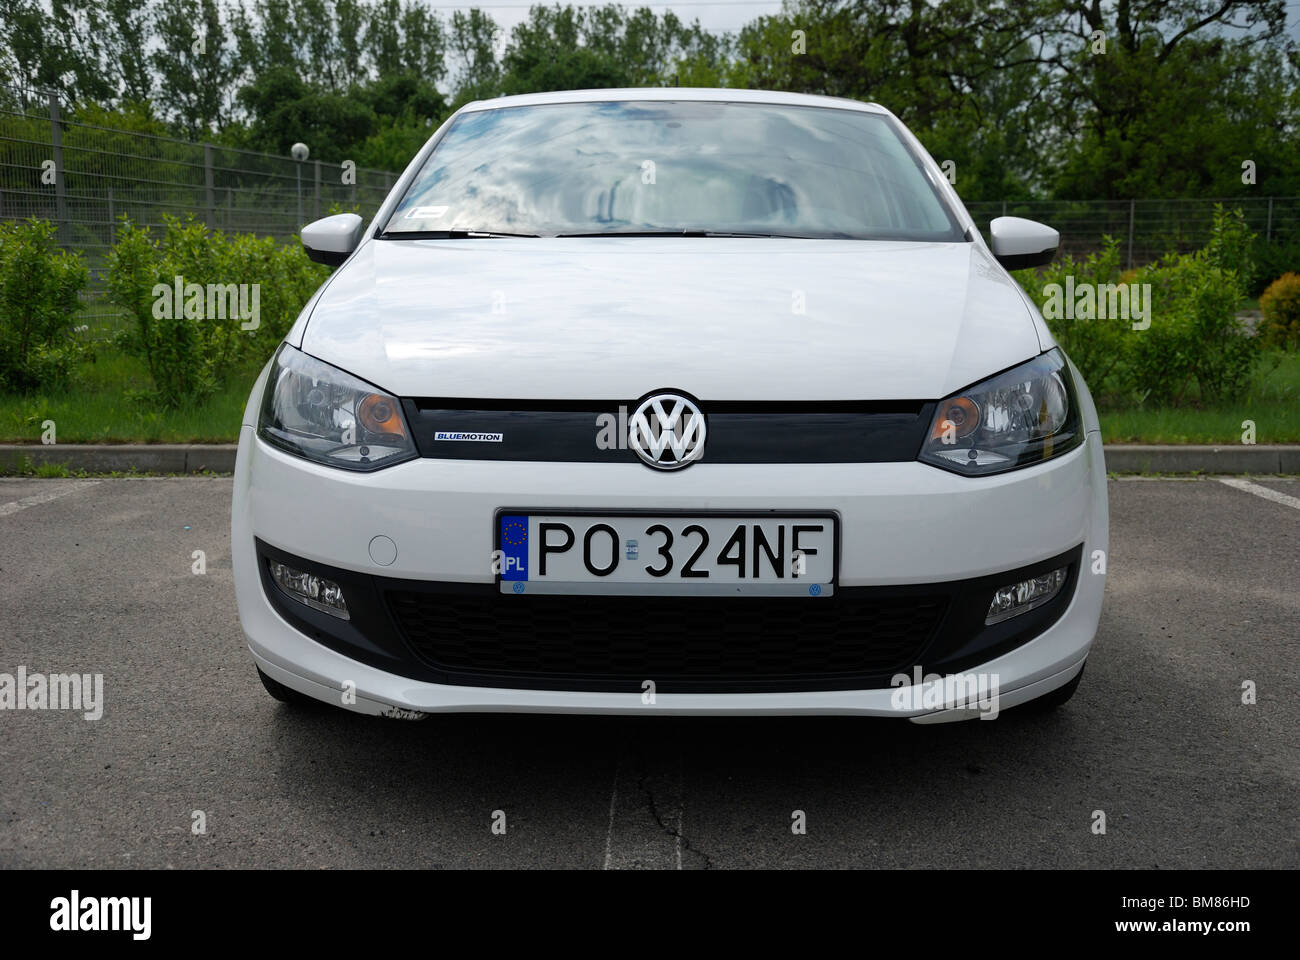 Vw Polo Bluemotion High Resolution Stock Photography and Images - Alamy